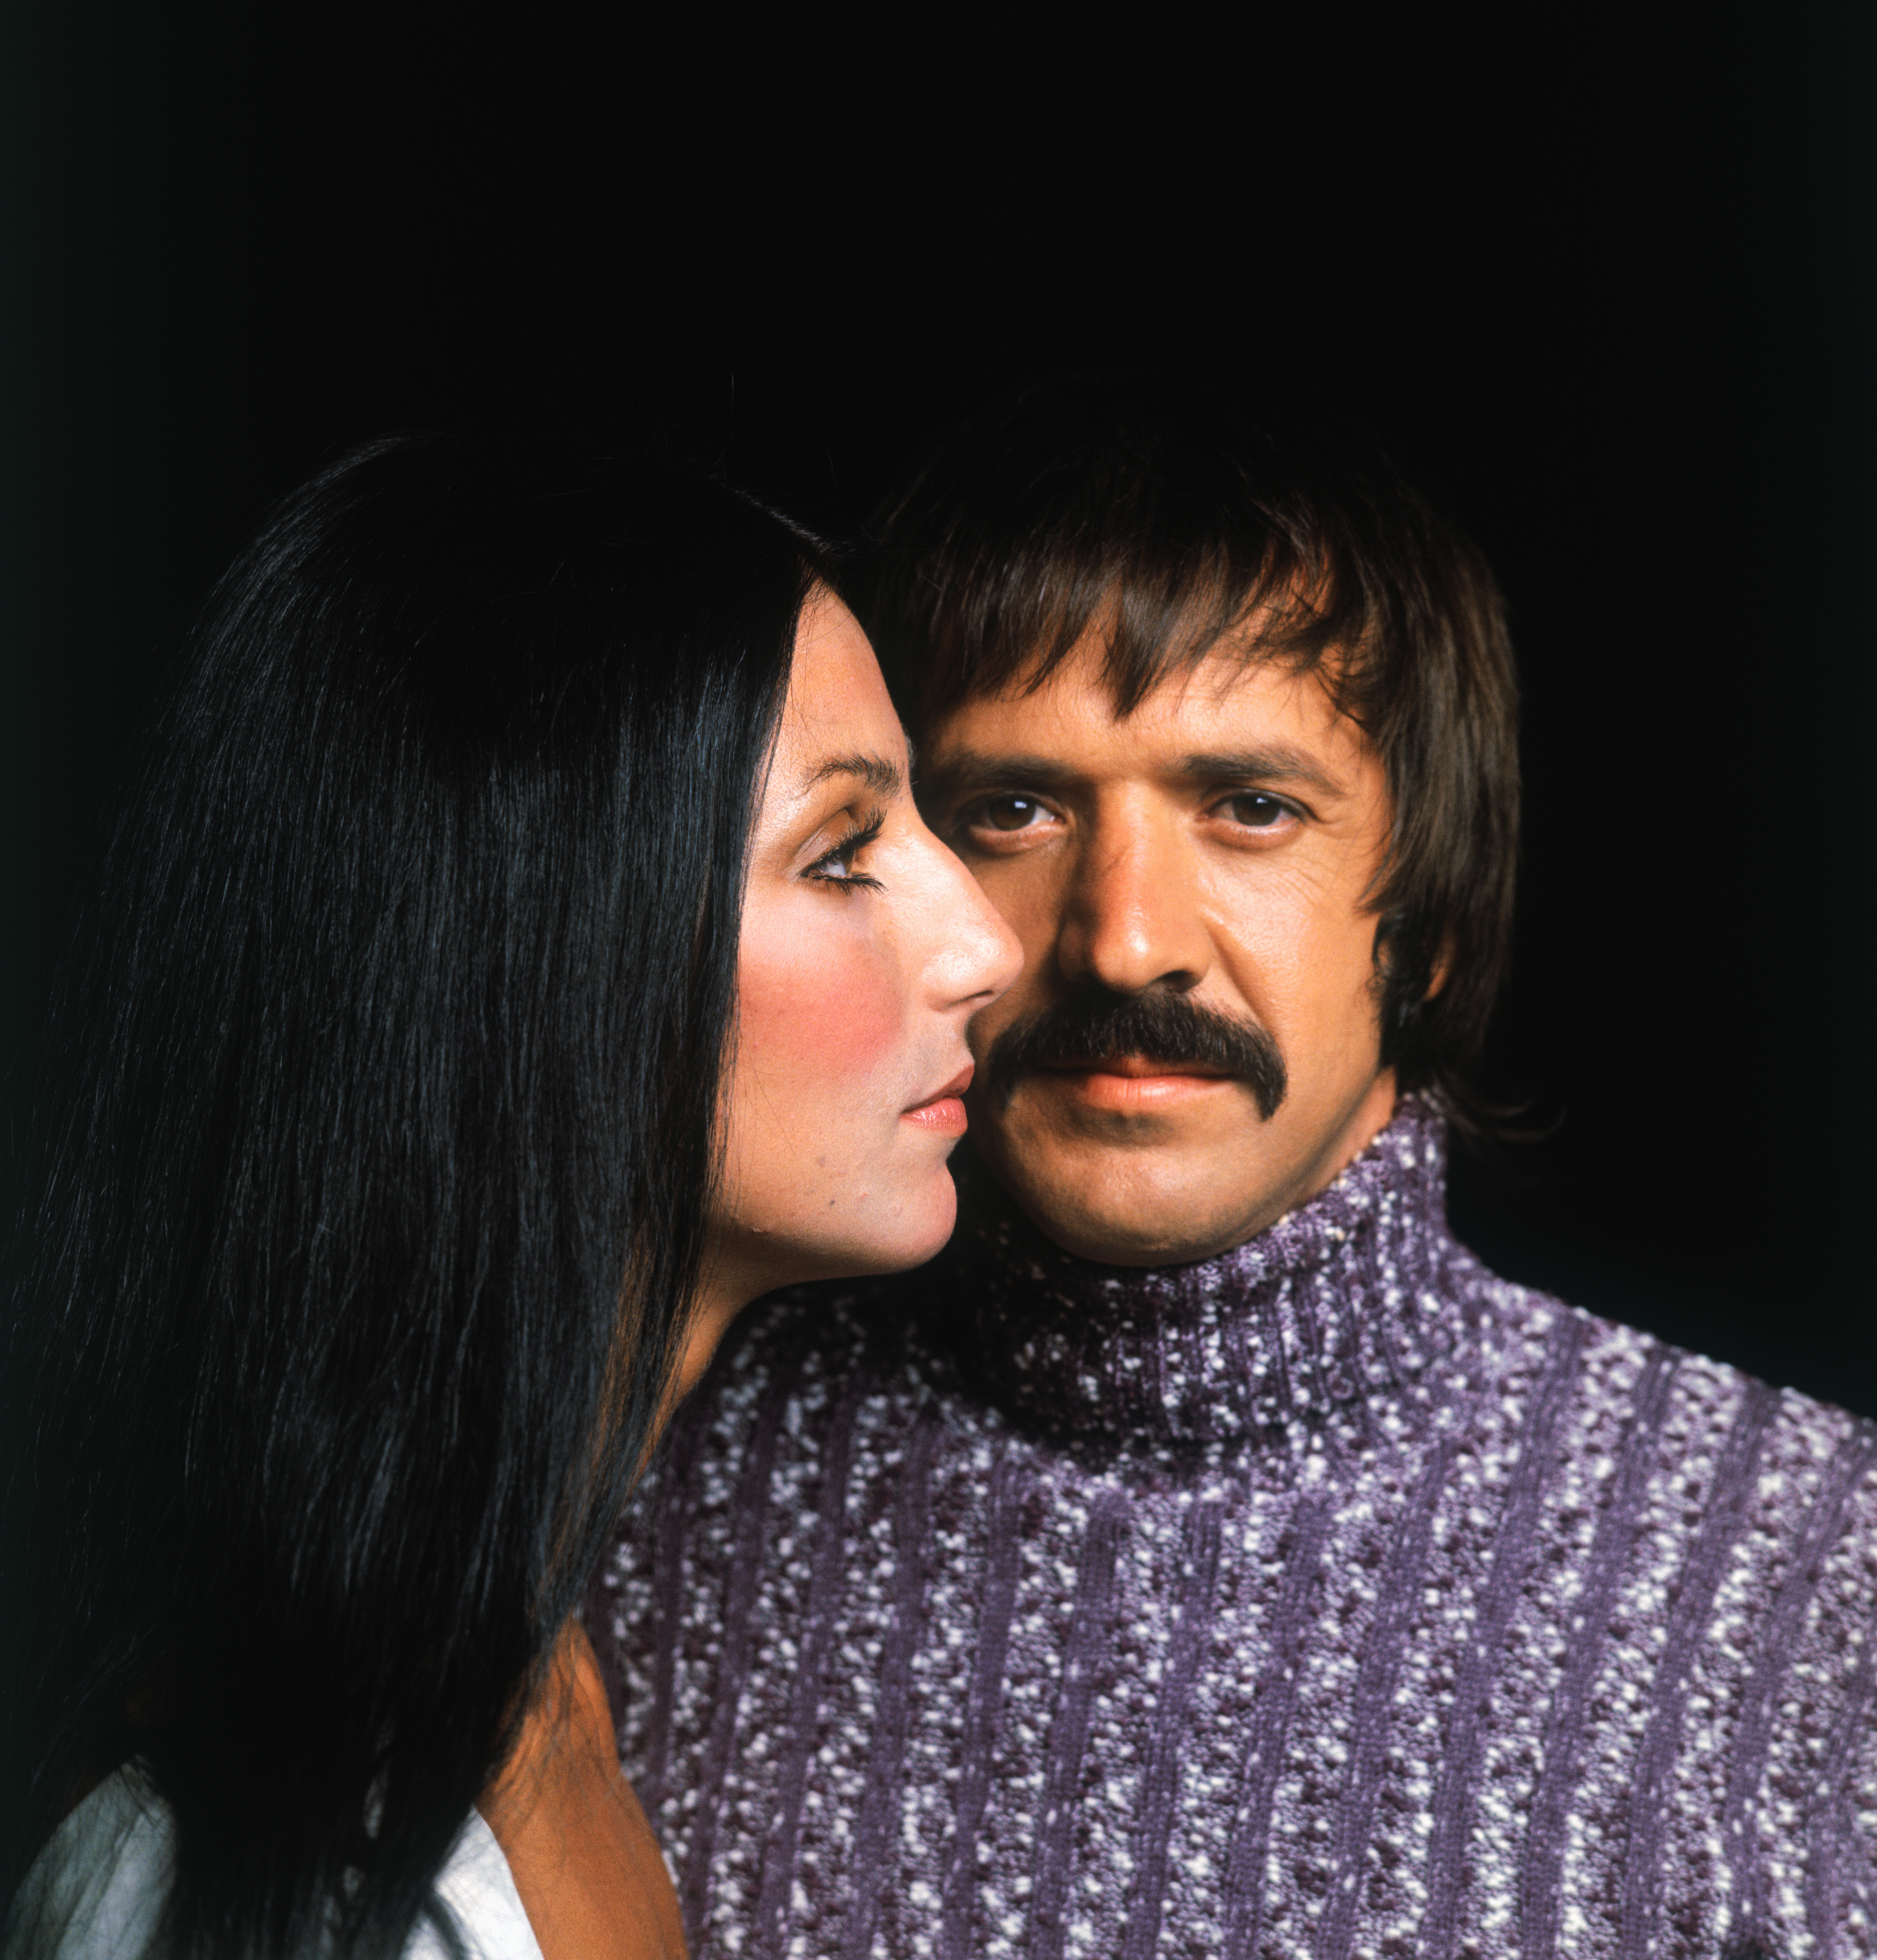 Sonny Bono and Cher, in October 1980 in New York City | Source: Getty Images